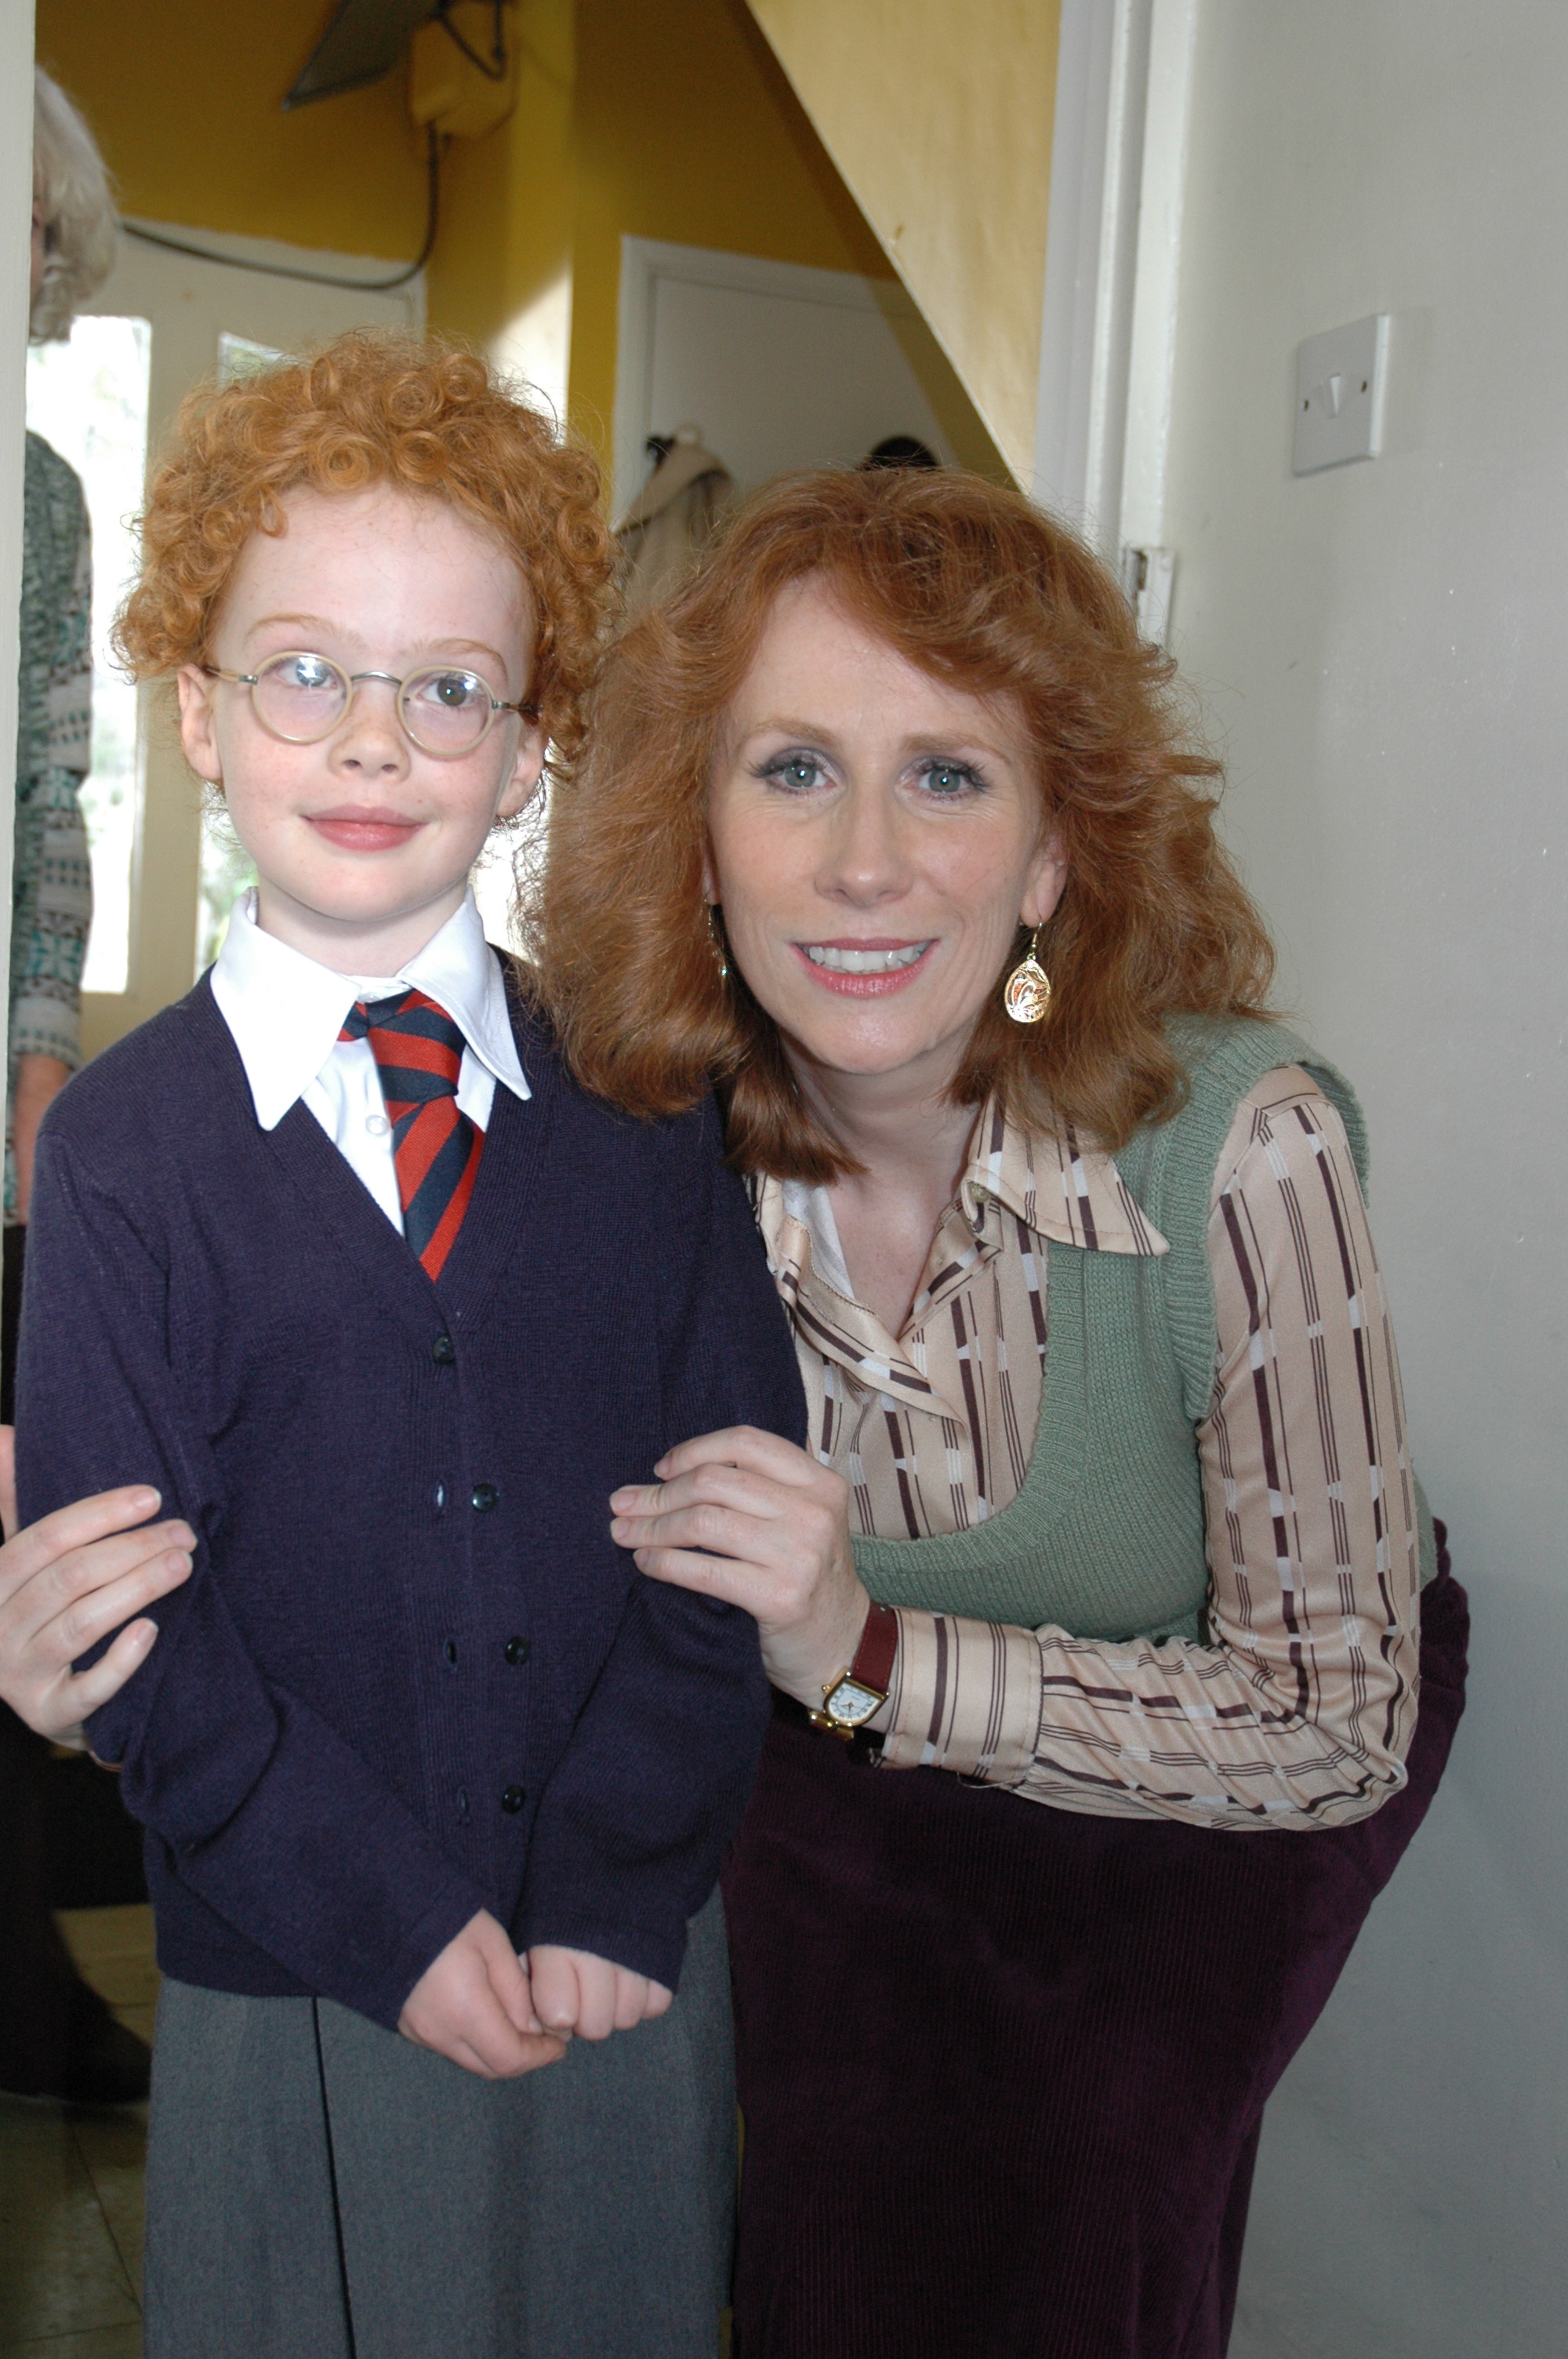 CATHERINE TATE & MADDY IN SKY'S CHRISTMAS CRACKER